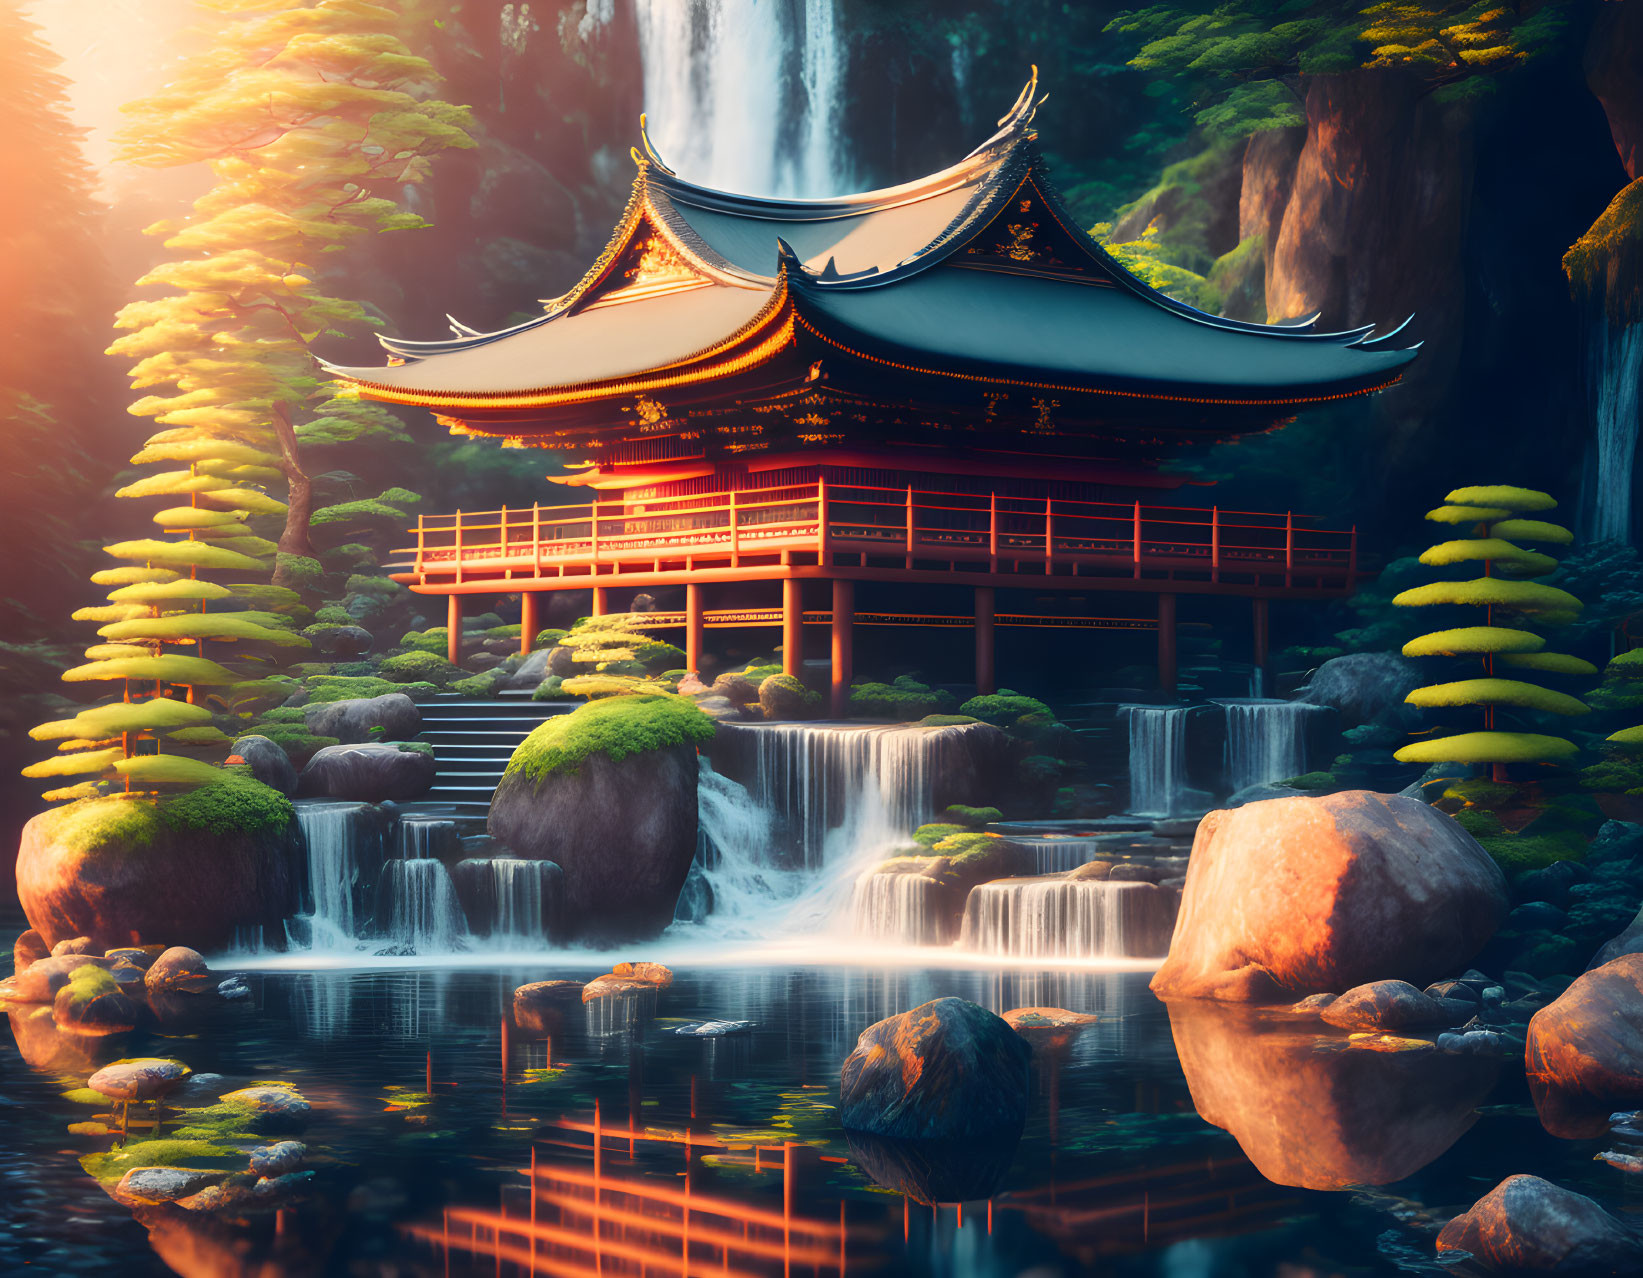 Traditional Asian Pagoda Surrounded by Waterfalls and Greenery